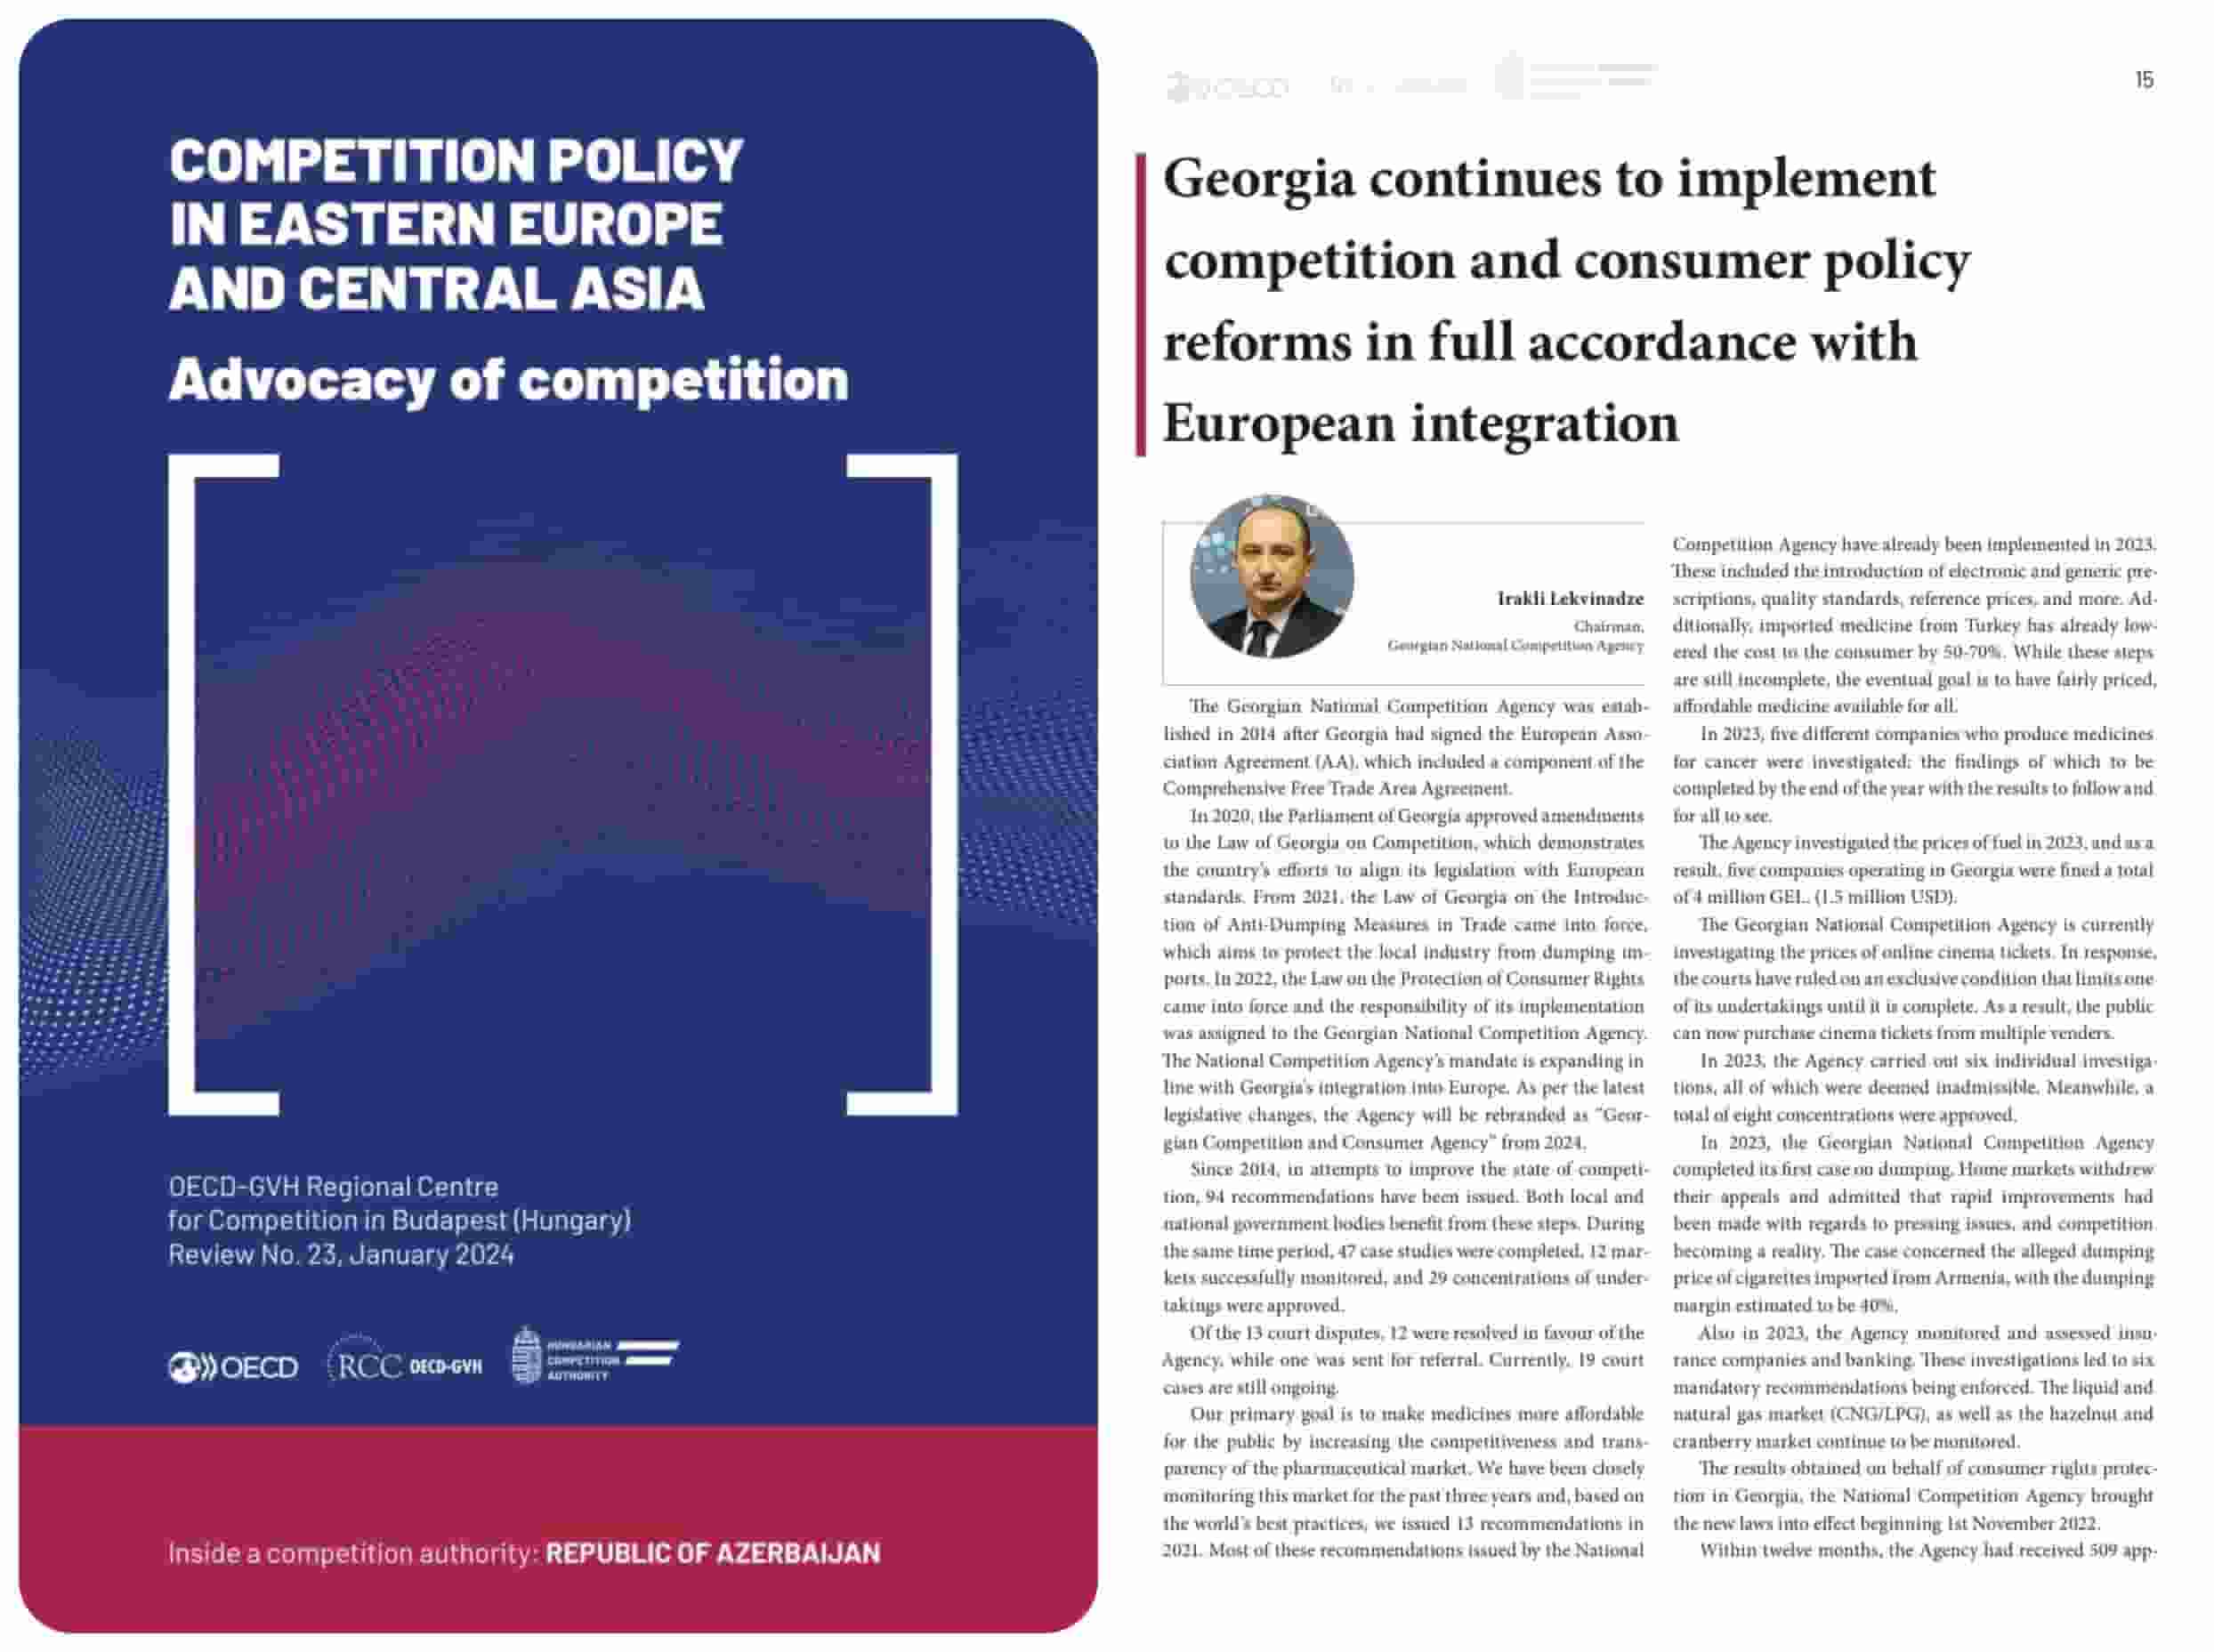 OECD-GVH RCC publishes an article by Irakli Lekvinadze